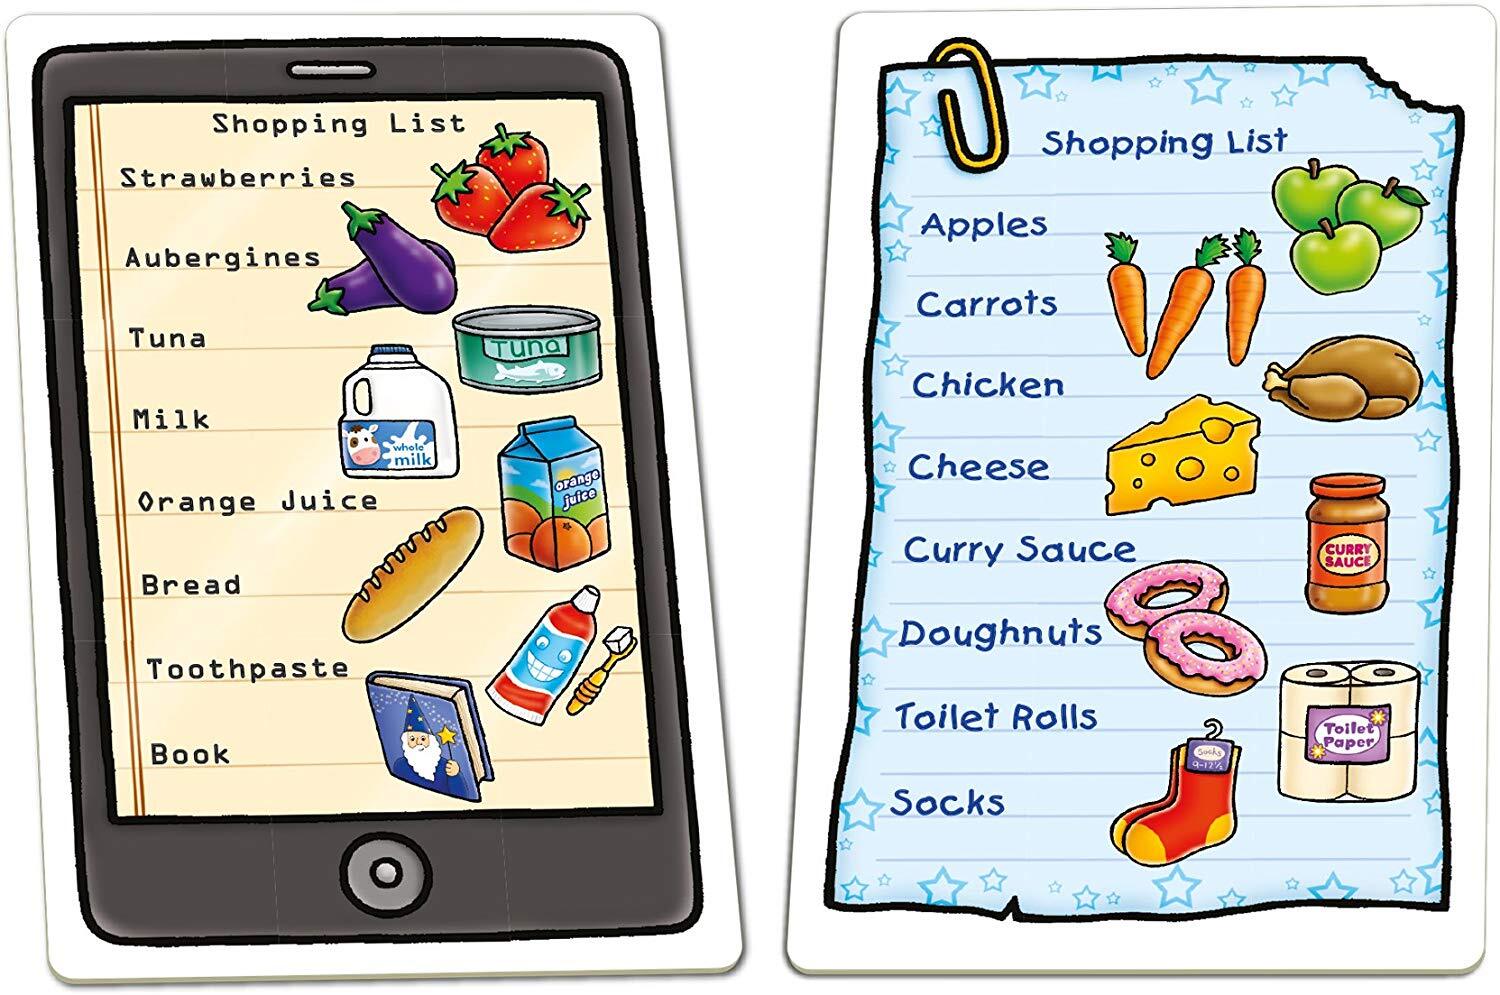 ORCHARD TOYS - SHOPPING LIST GAME